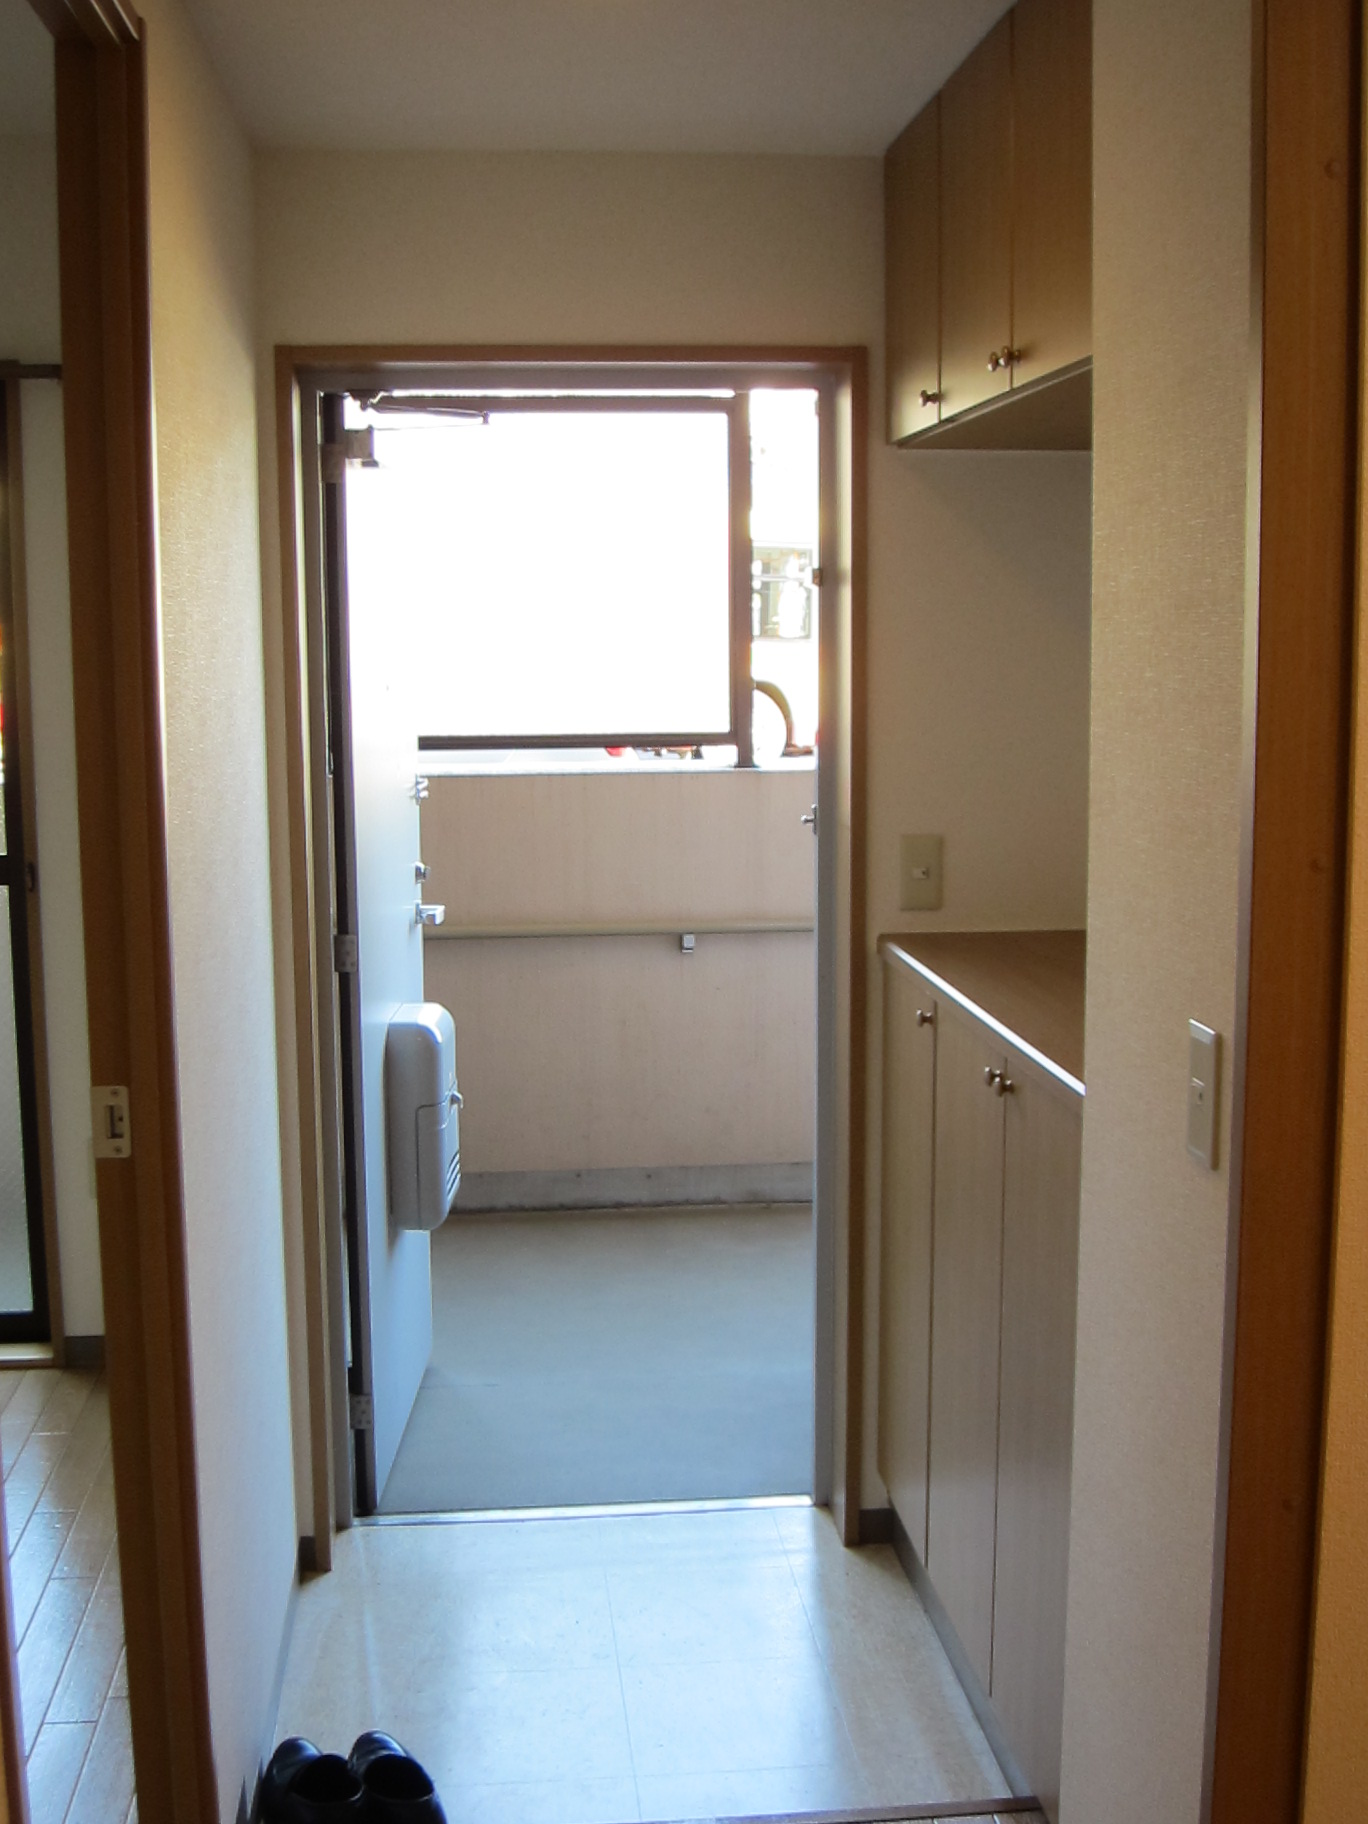 Entrance. Sufficient storage capacity is also a large family There is also a hanging cupboard